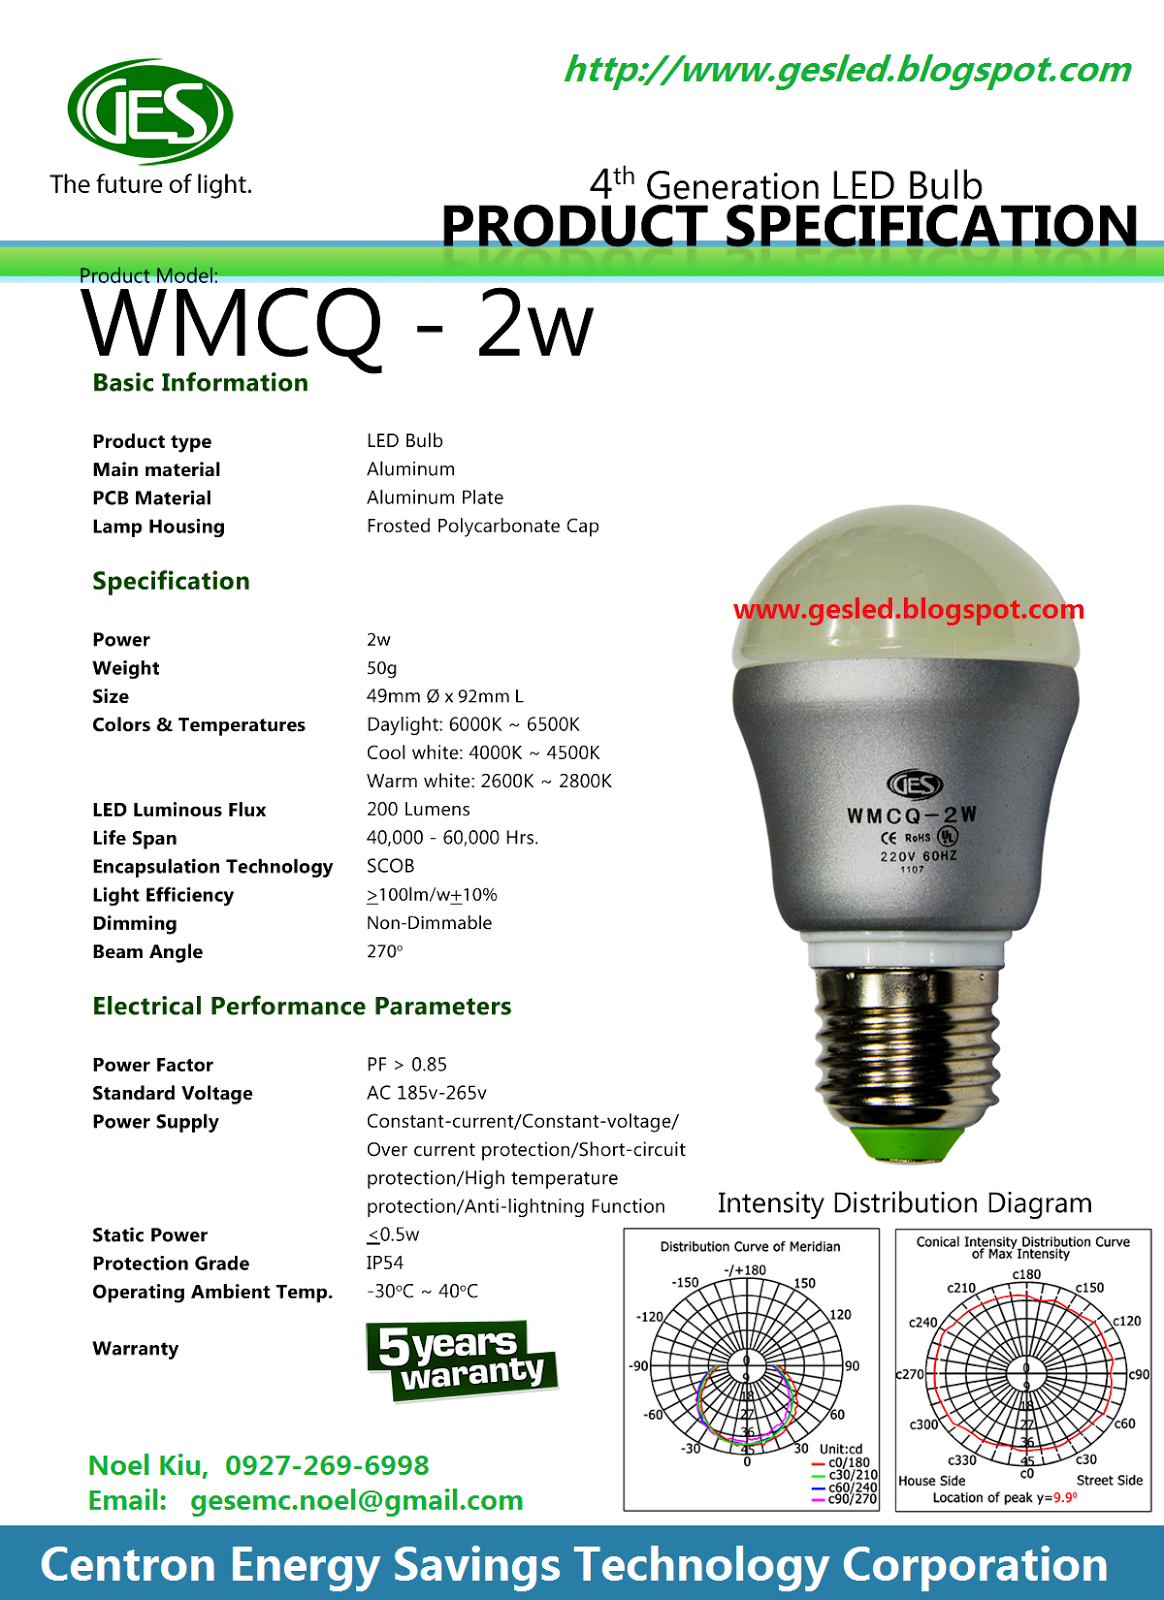 technical-specifications-ges-4th-generation-led-lights